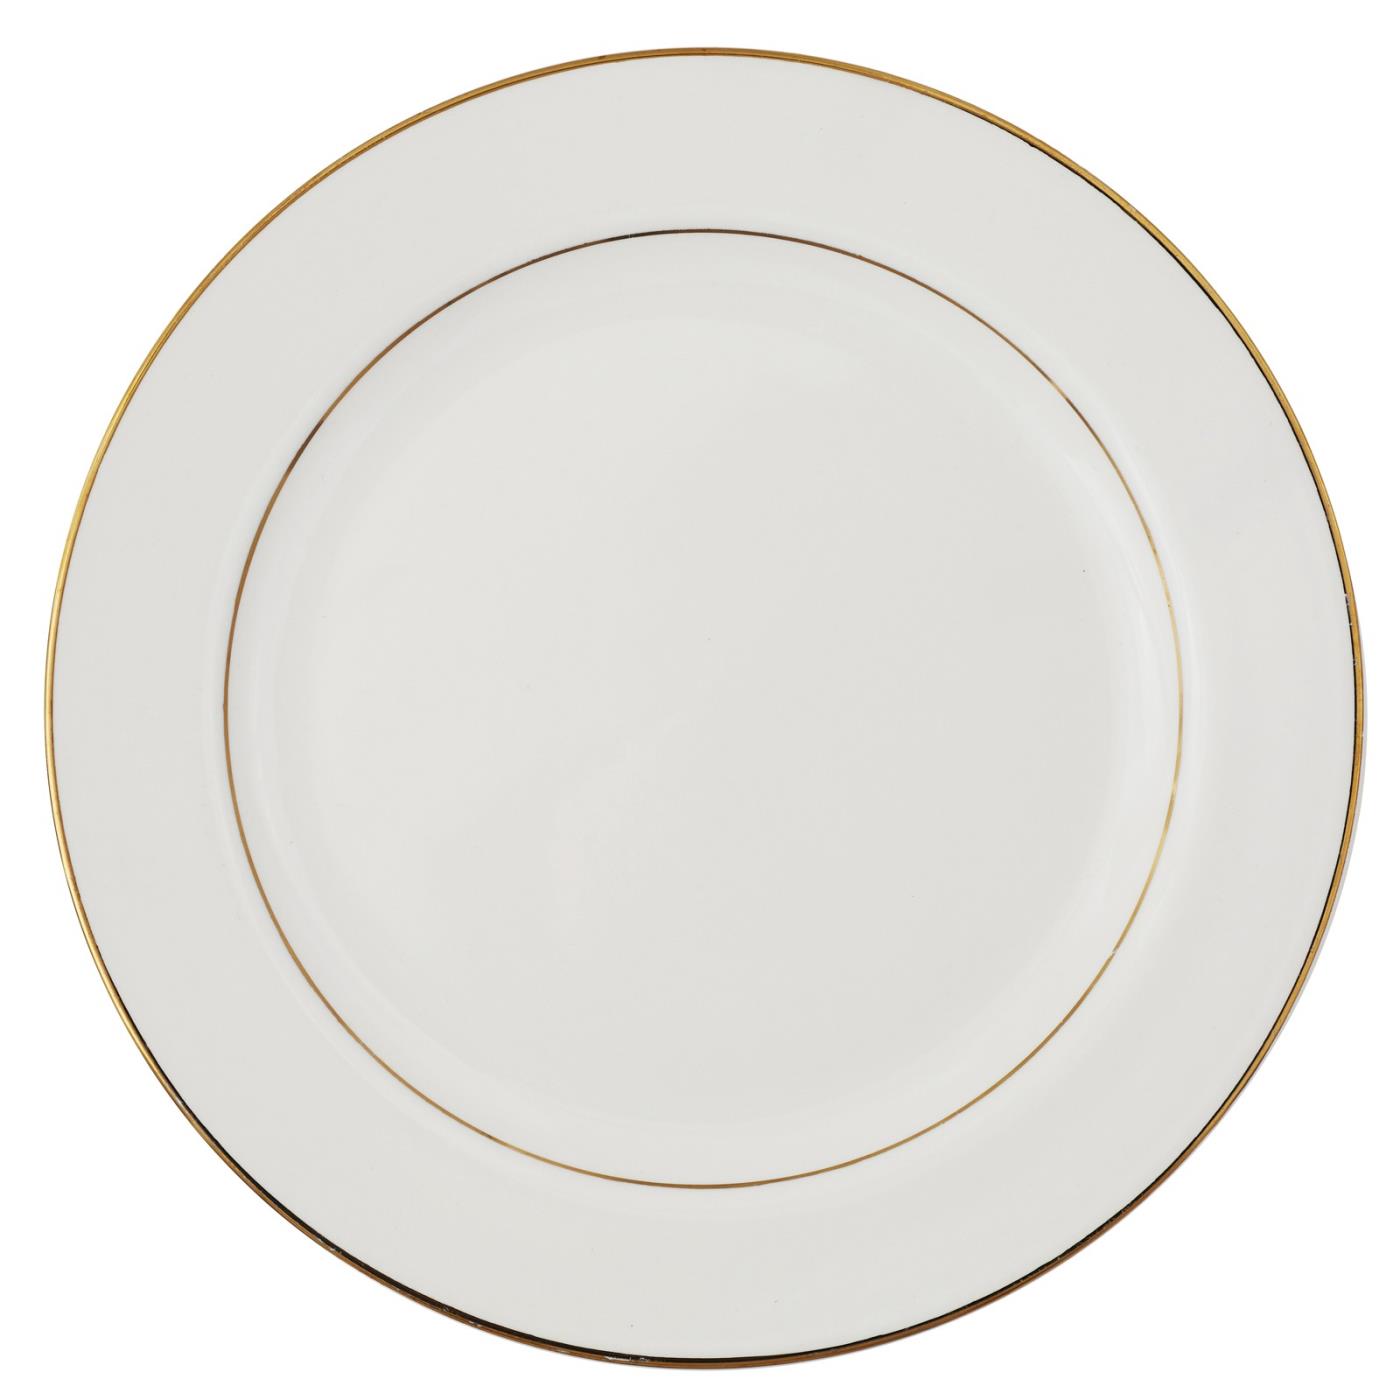 Ecru with Gold Rim Collection -  Charger/Chop Plate 12"